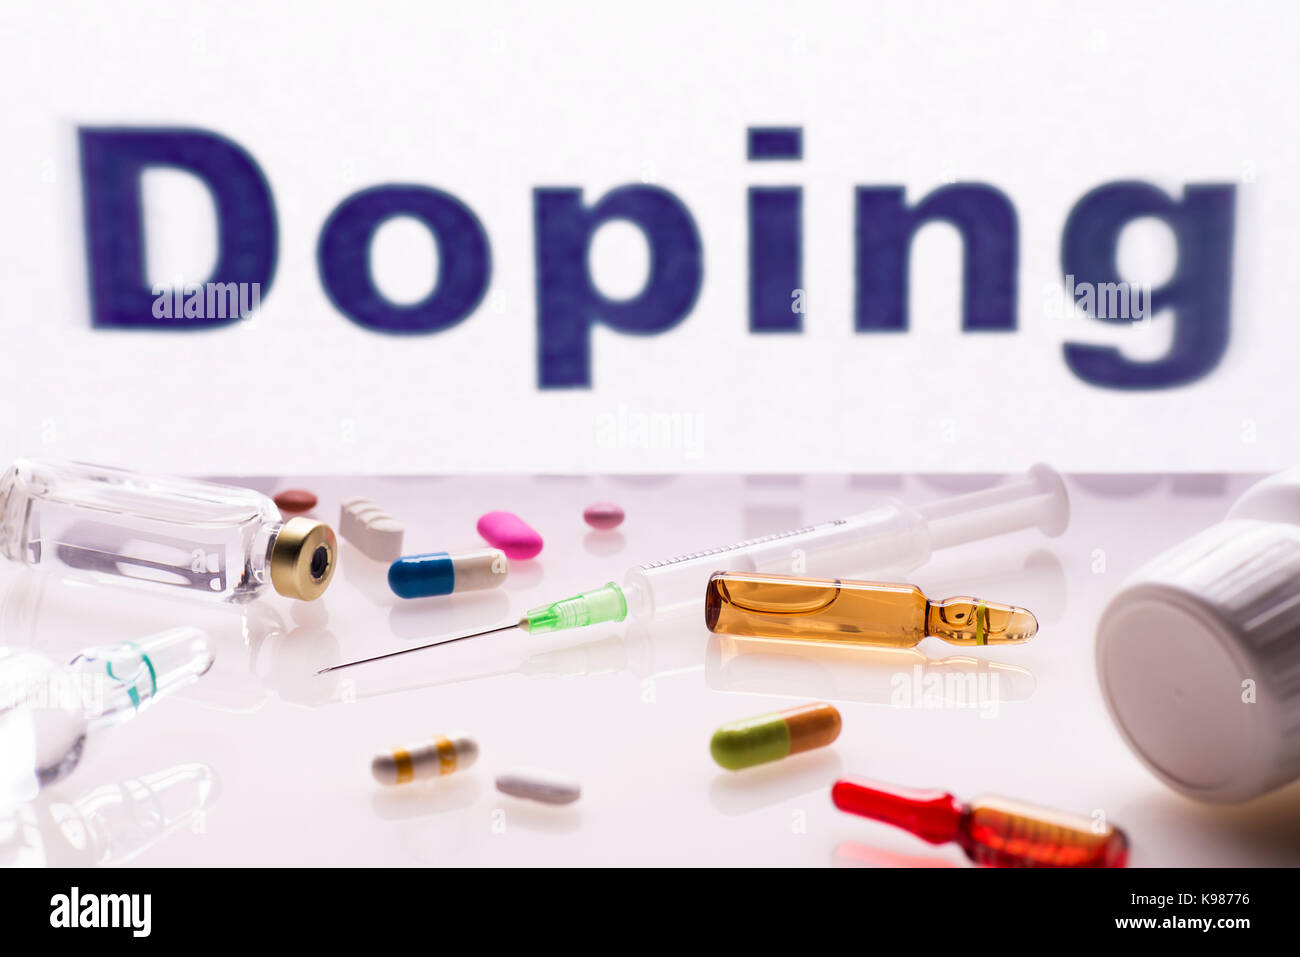 Several drugs that are used for illicit doping. Stock Photo